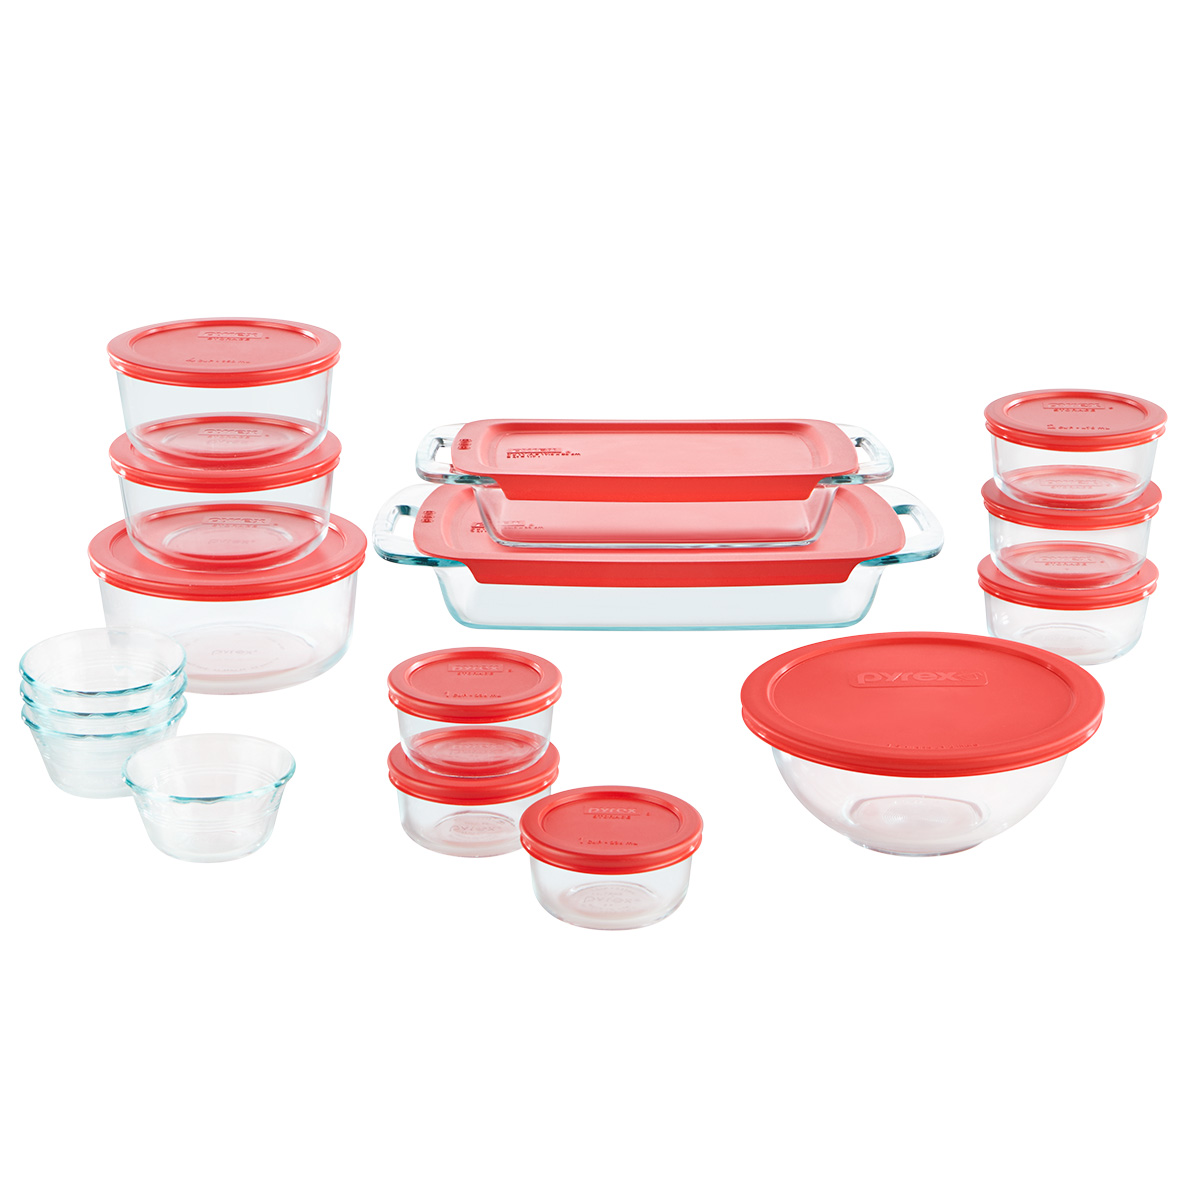 Pyrex® Easy Grab, Bakeware Set, Red, 28-Piece - image 1 of 9